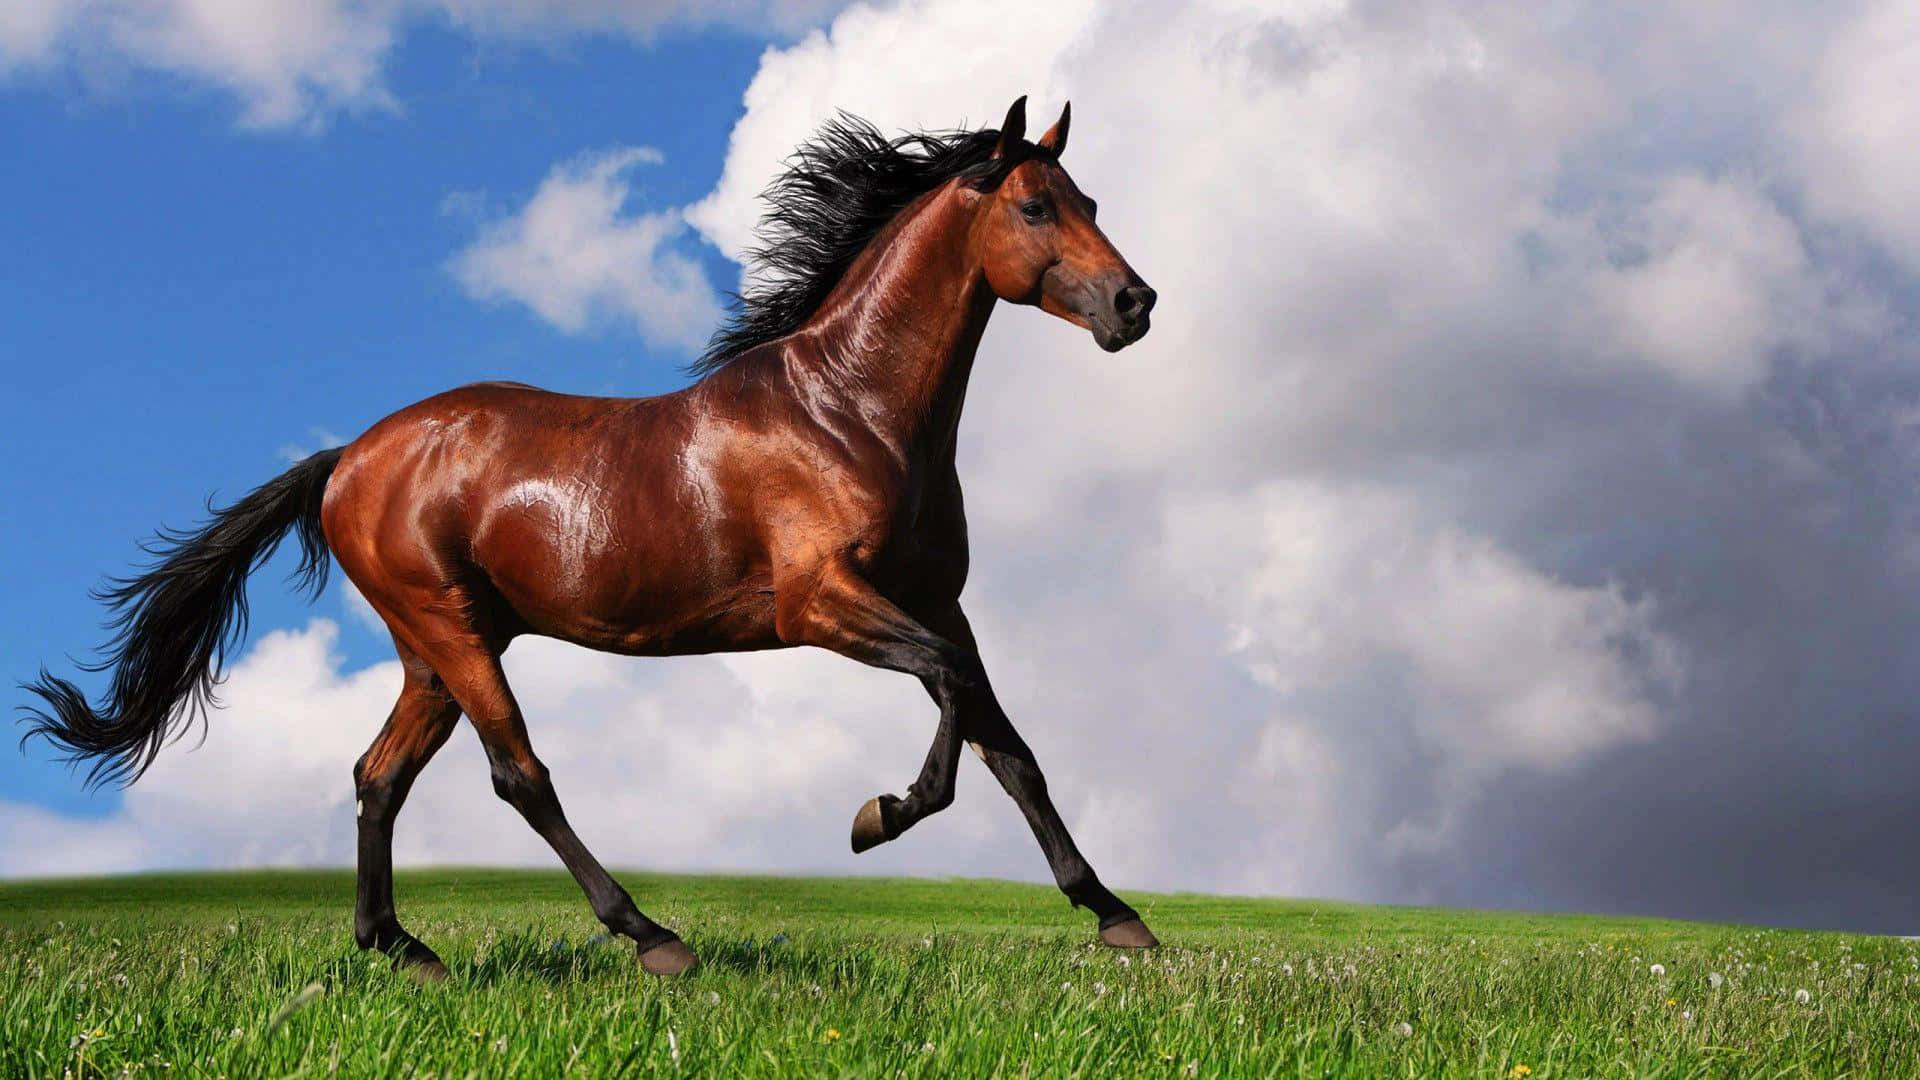 Stunning Brown Horse Galloping in a Green Meadow Wallpaper